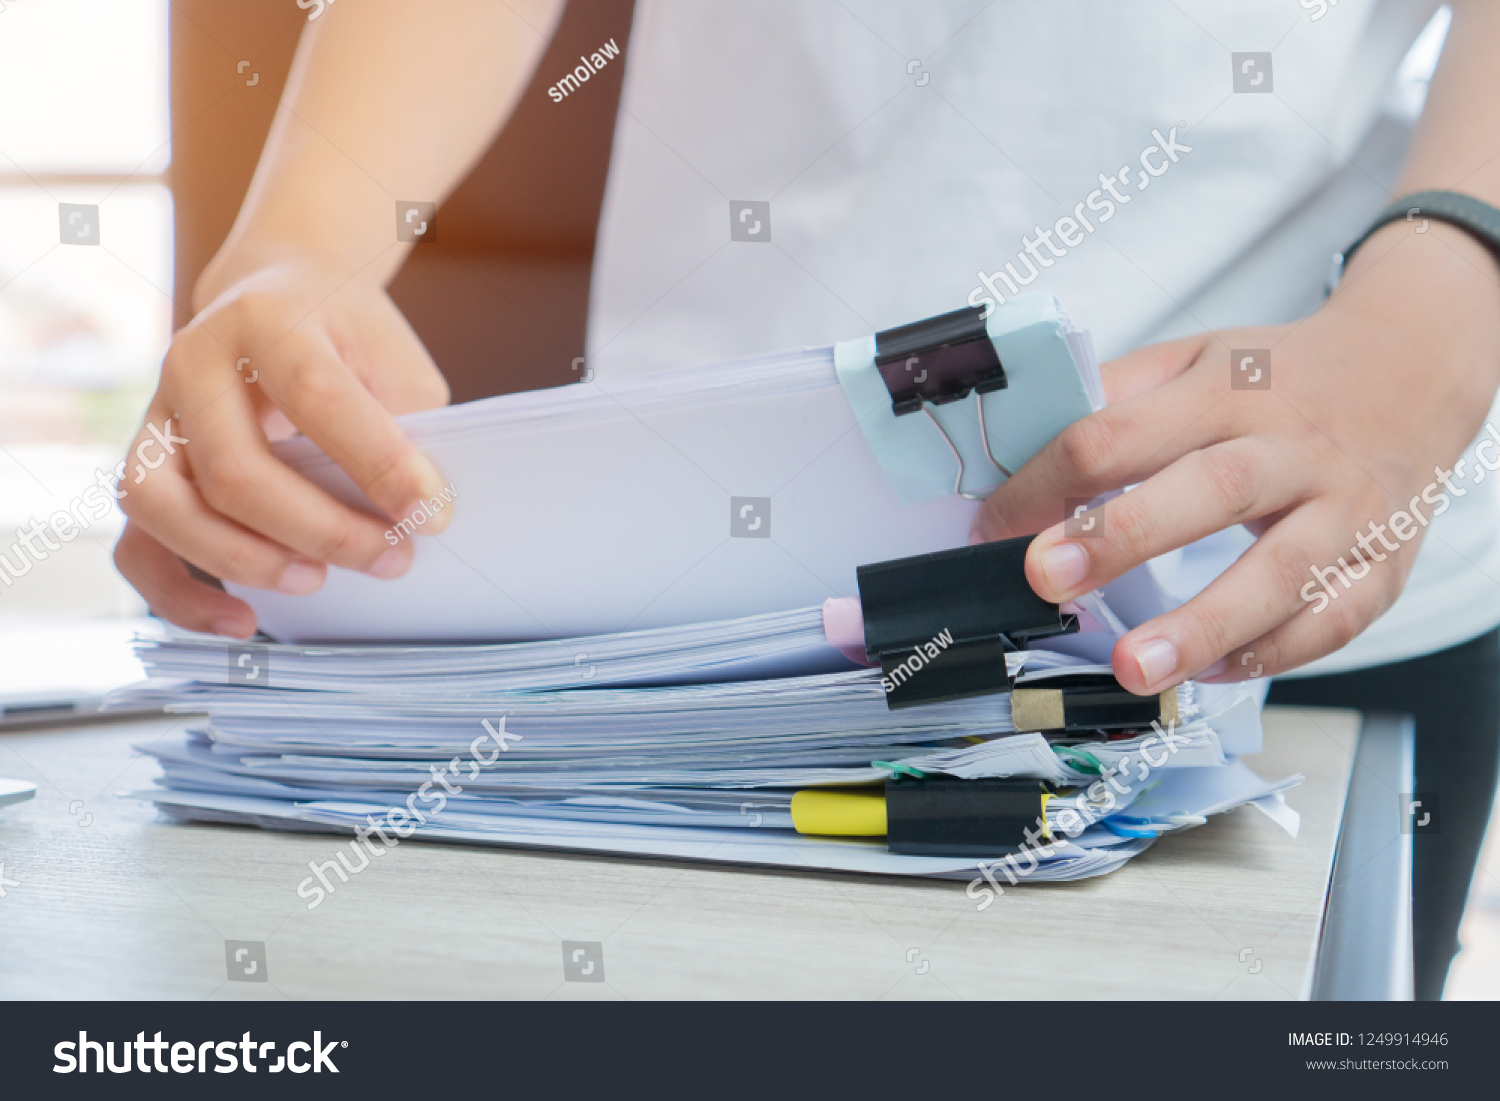 Business Documents concept : Businessman hands working in Stacks paper files for searching and checking unfinished document achieves with clip papers on busy work desk office. Soft focus #1249914946